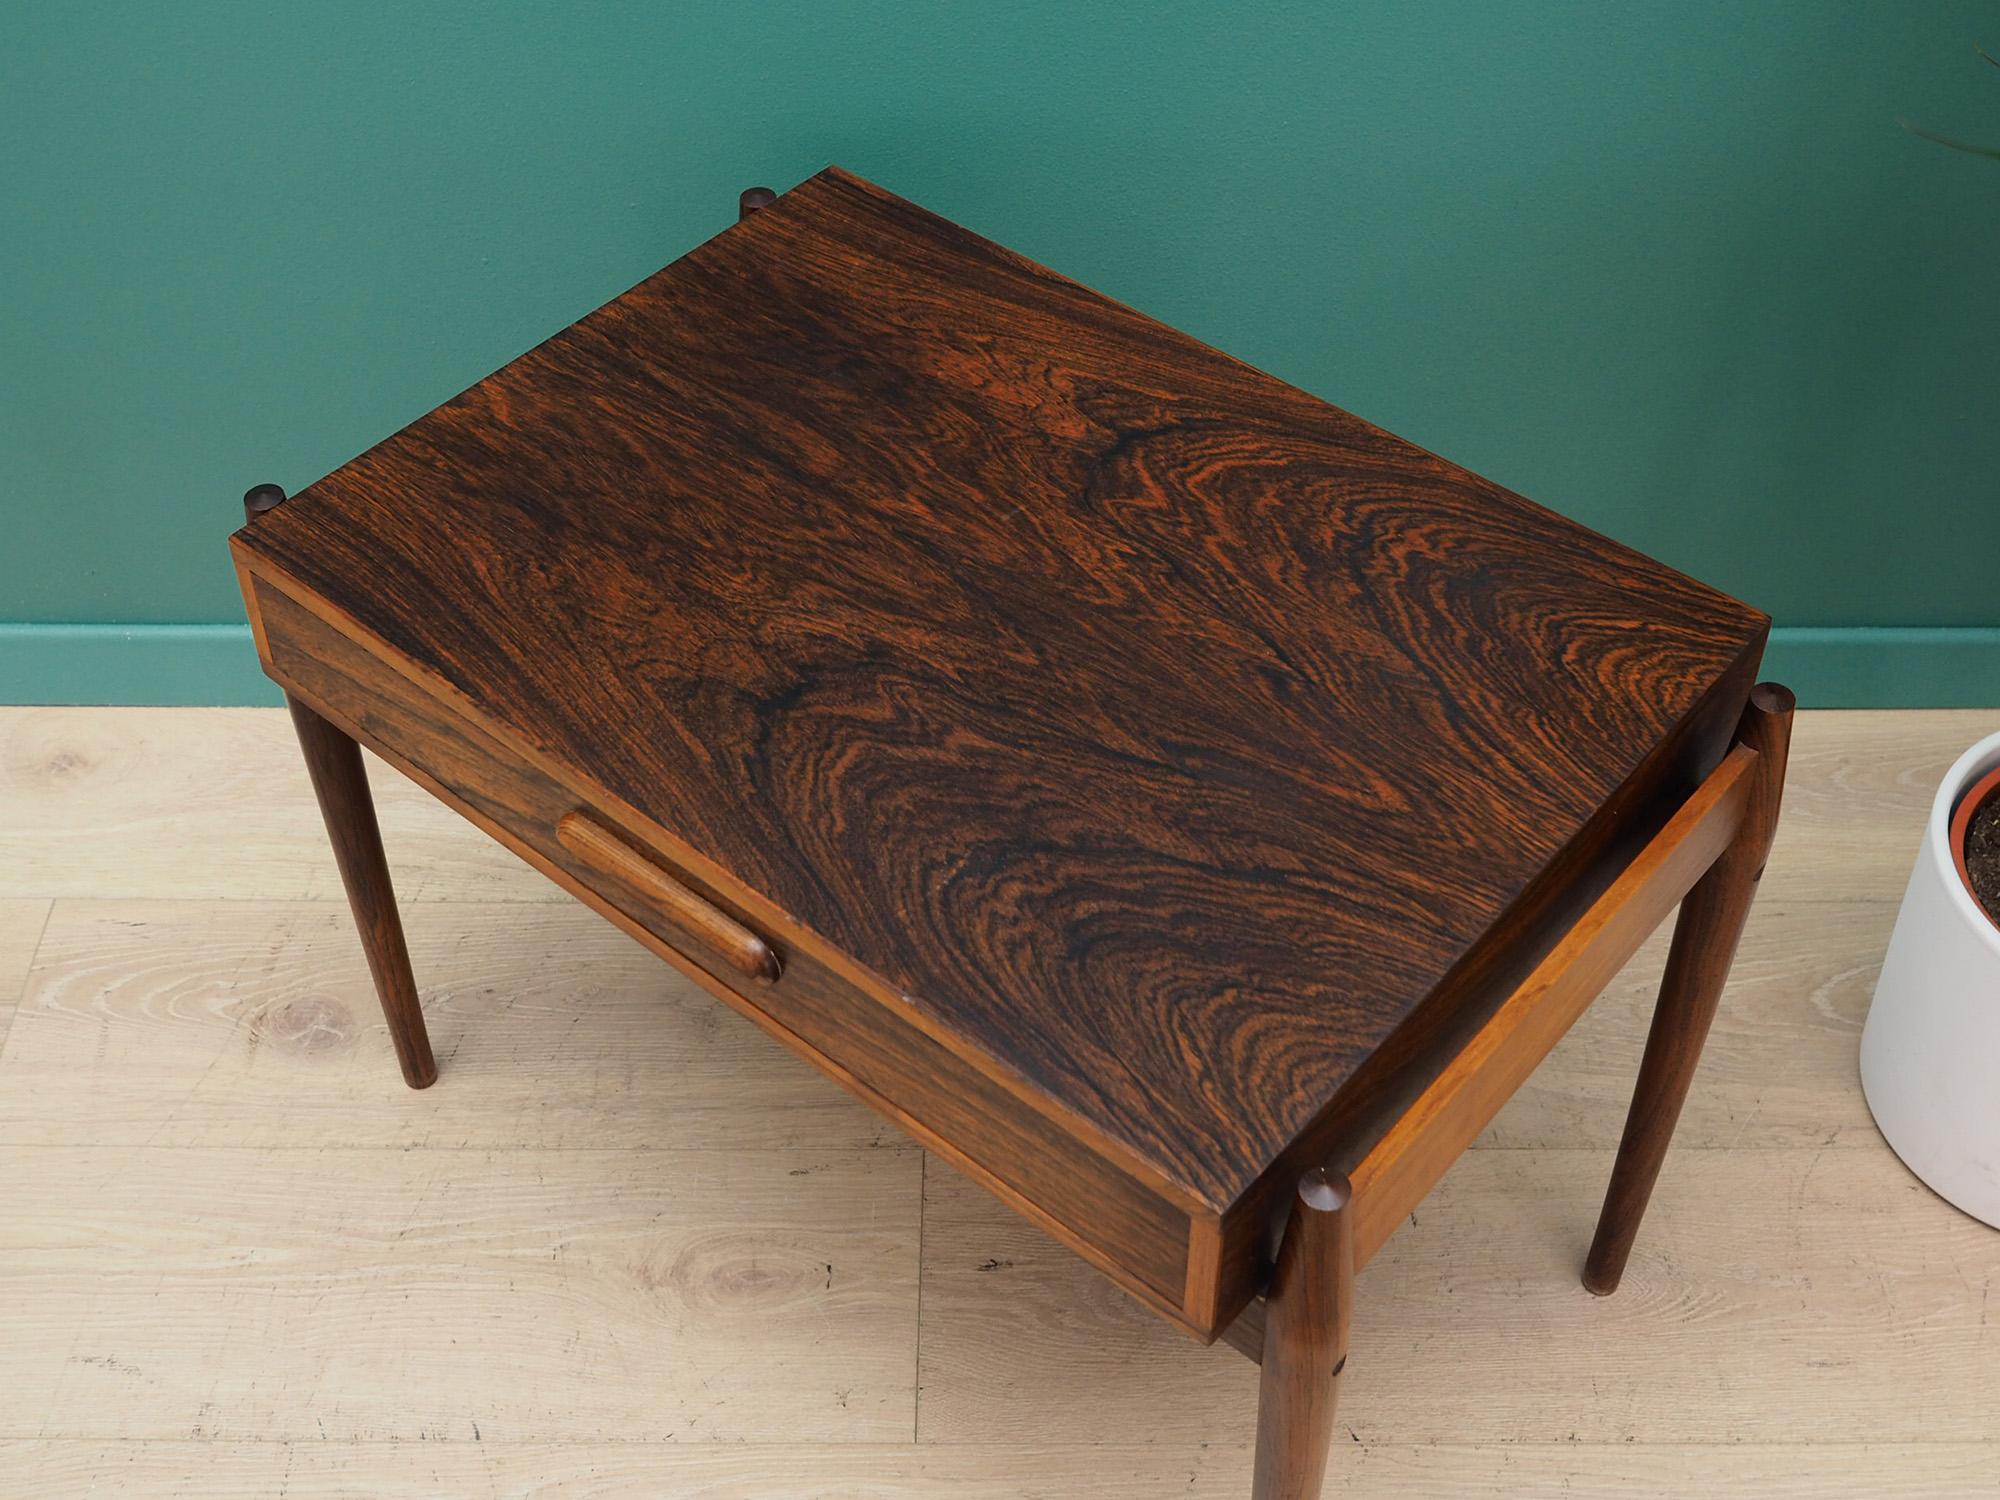 Rosewood Sewing Table 1960s-1970s Danish Design Vintage